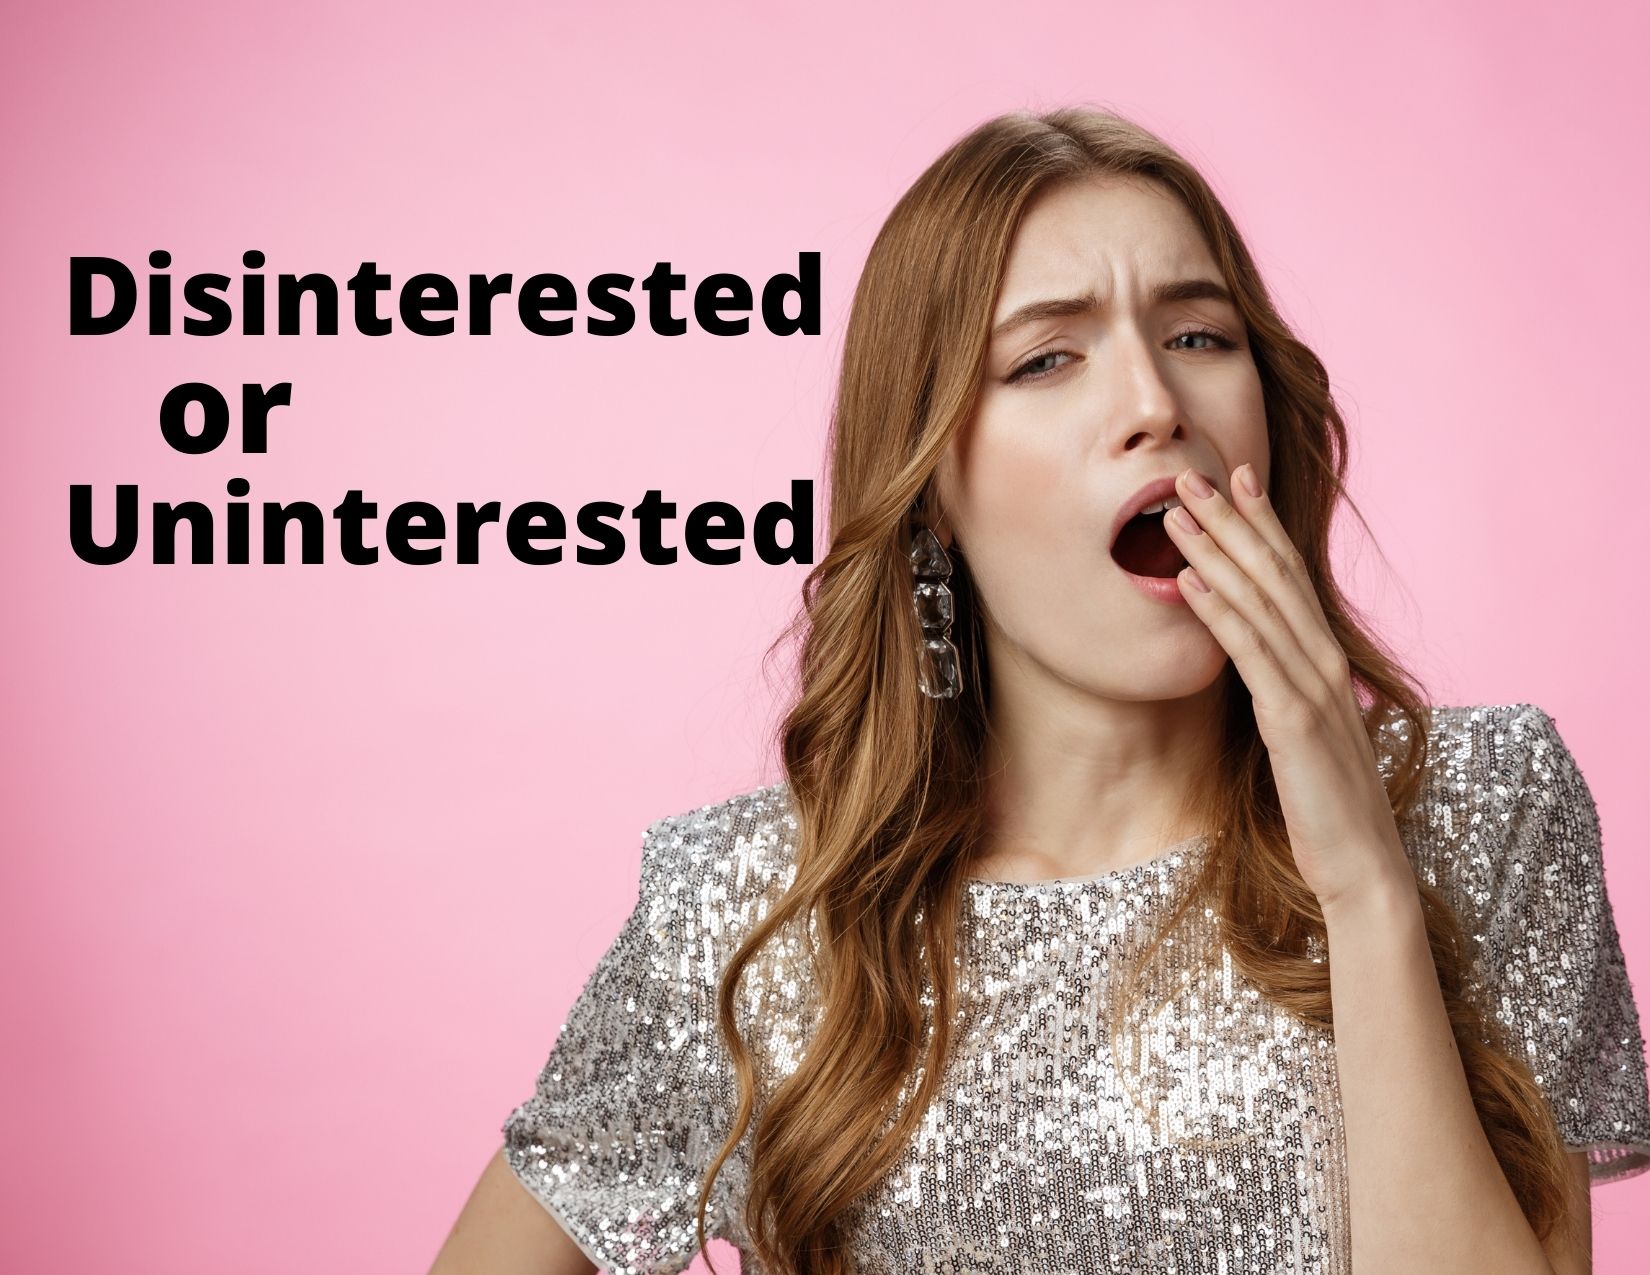 Graphic showing a woman yawning with the words 'Disinterested or Uninterested'